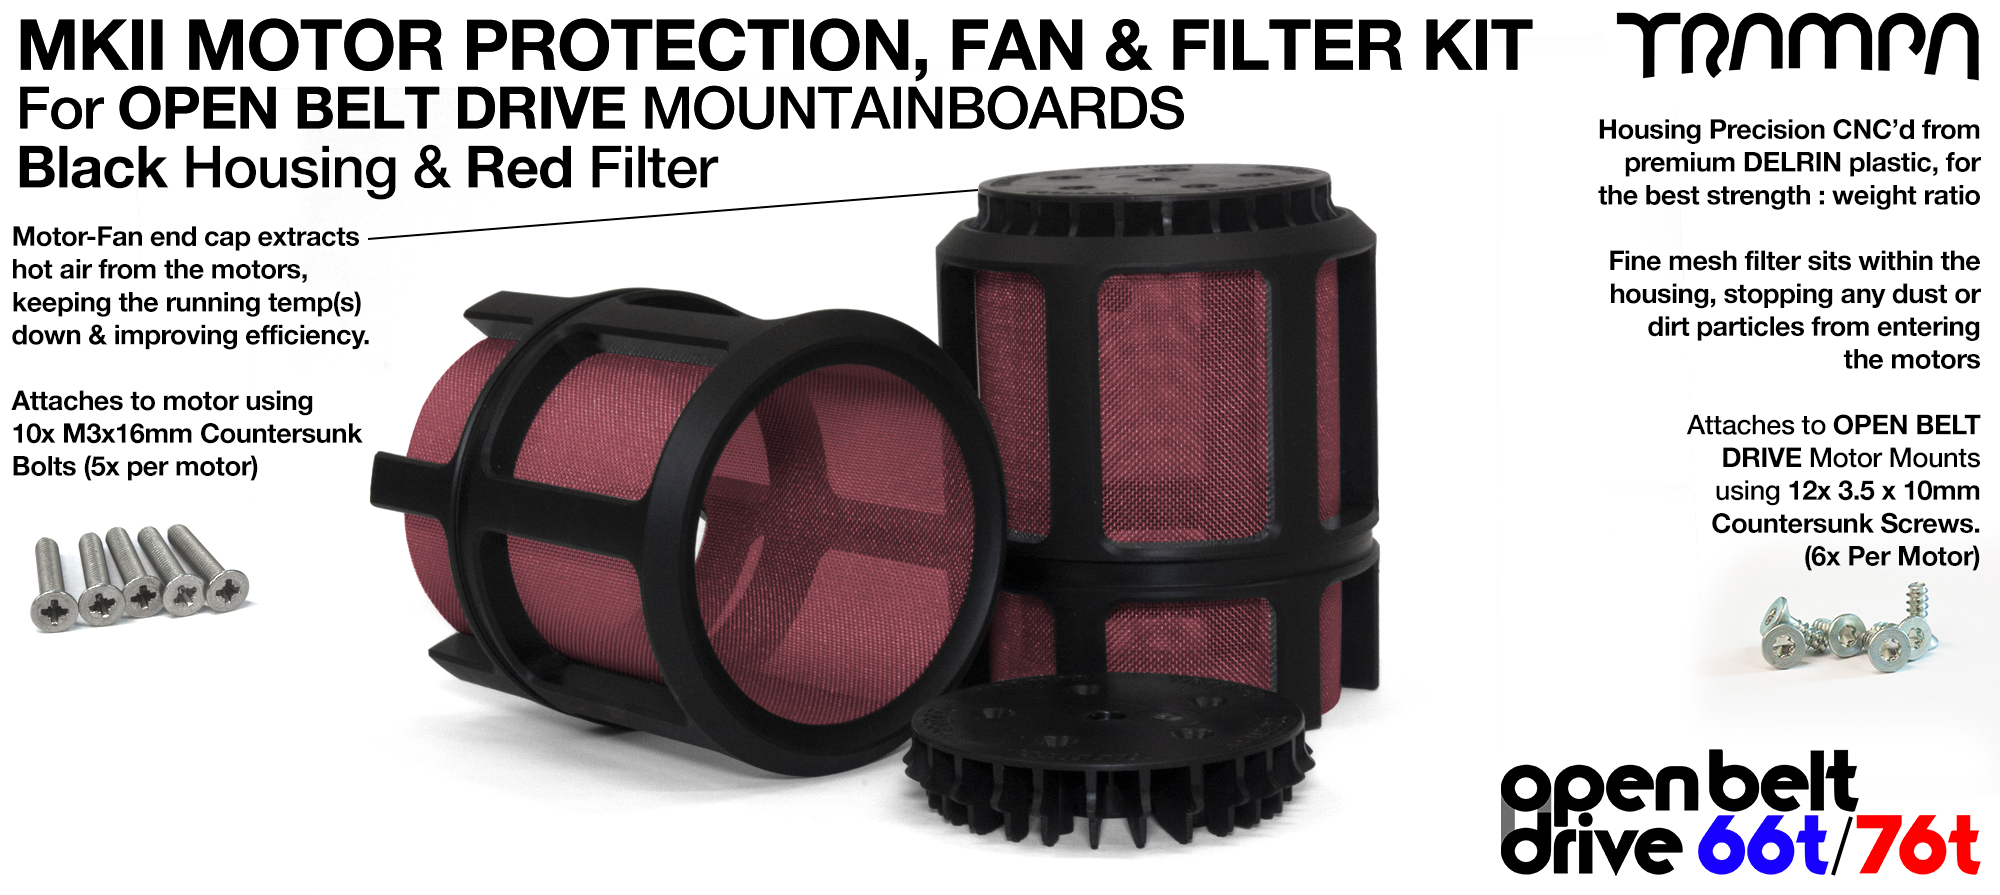 FULL Motor Protection Cage Filter & Fan - RED 